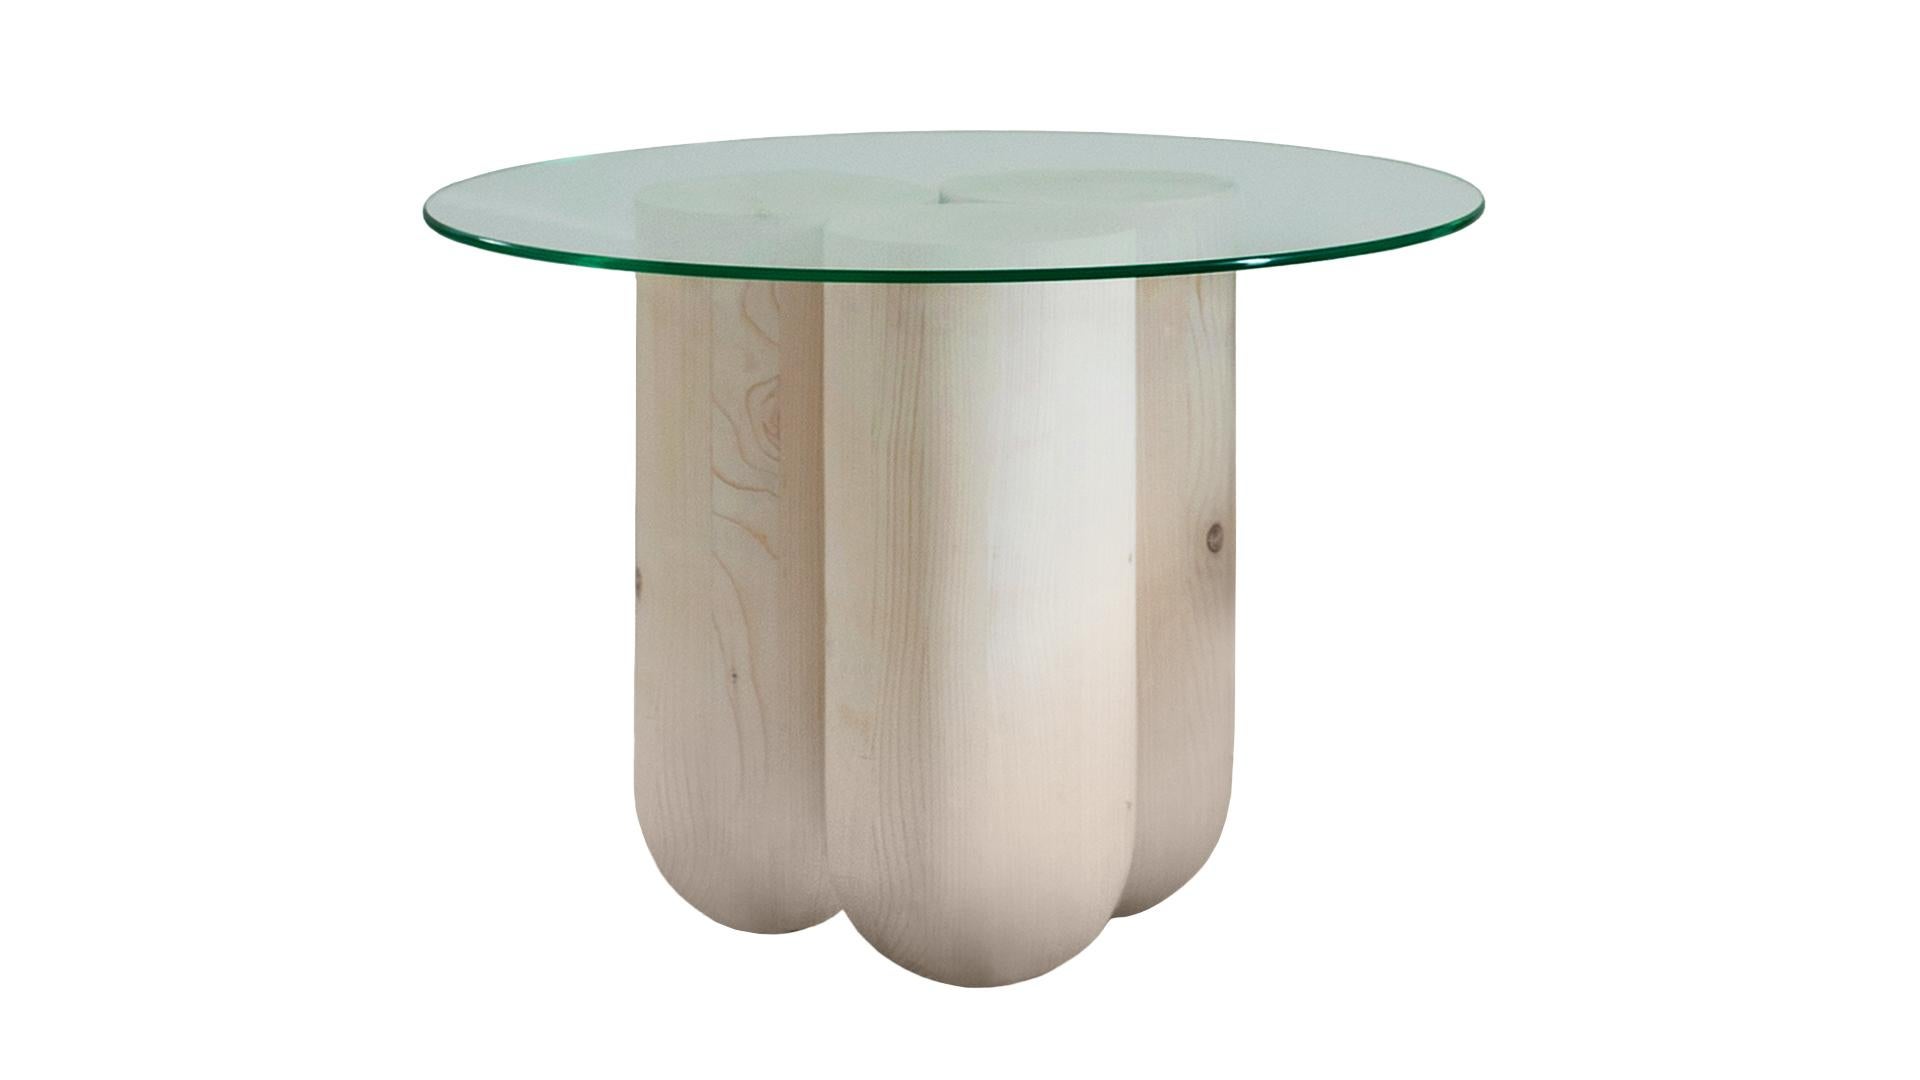 Mia Side Table by LI-AN-LO Studio
Dimensions: ø 70 x 50 cm.
Materials: Spruce and clear tempered glass.

Clear or bronze coloured glass top options available. Please contact us.

MIA is a side table with a playfully soft shape. The base, which